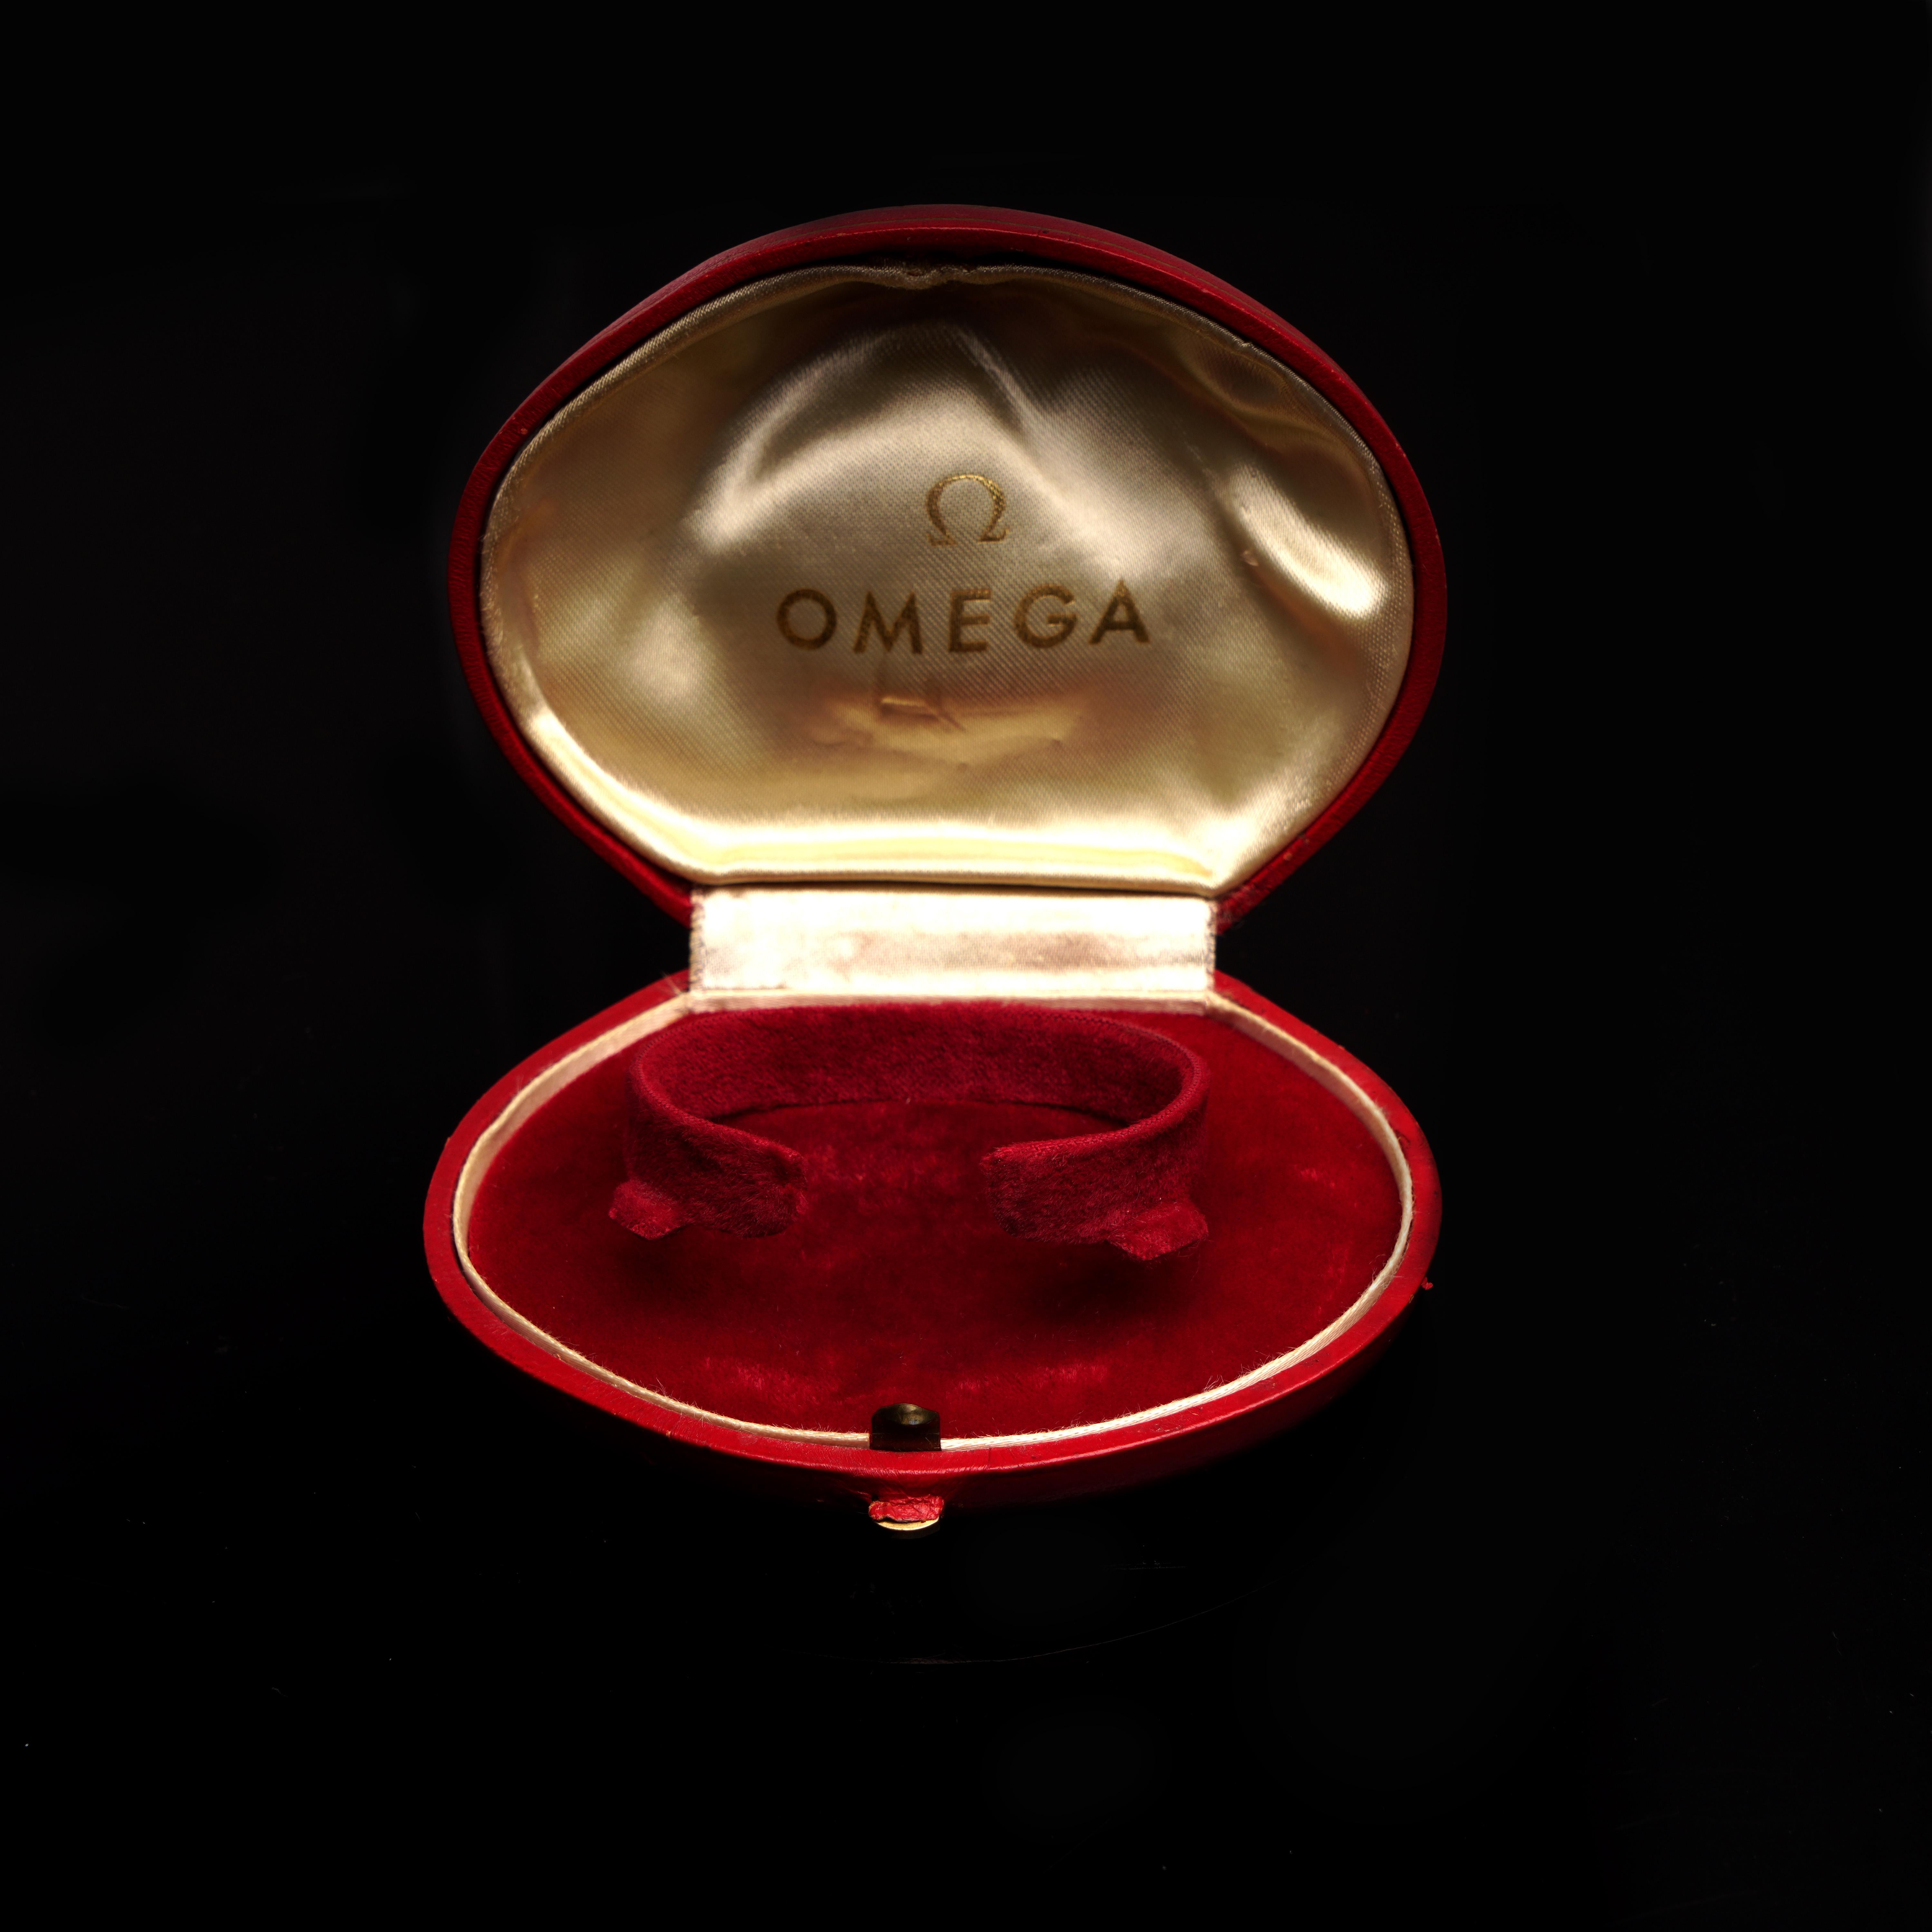 Omega  Vintage ladies wristwatch display box.
Made in Switzerland, 1960's 

Dimensions: Length x width x depth: 9.5 x 8 x 3.5 cm 
Weight: 63 grams 
Condition: Box is pre - owned, with minor signs of usage, good condition overall. 

About